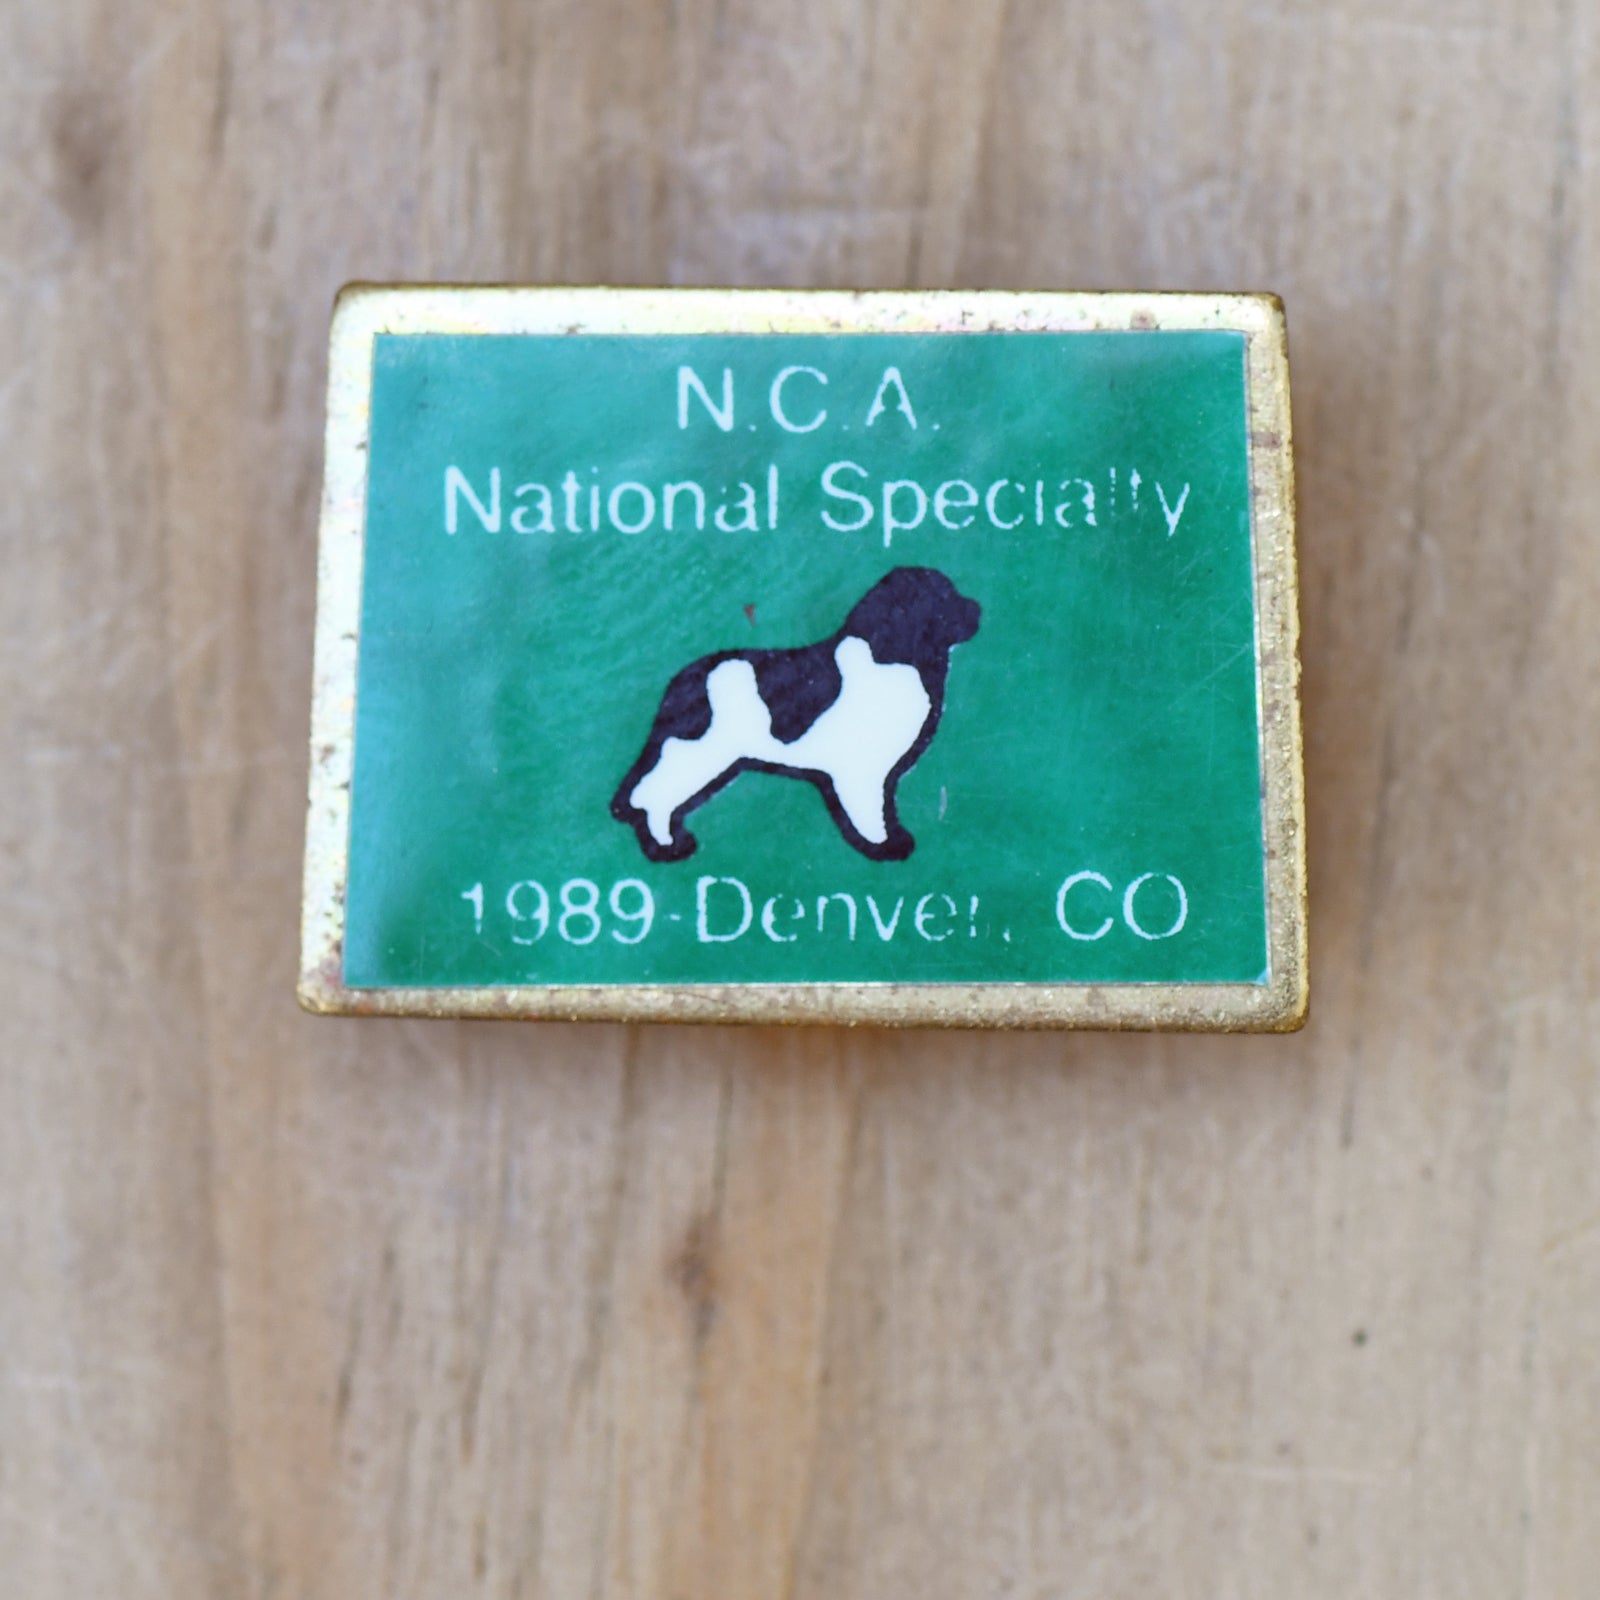 1989 NCA National Specialty Pin